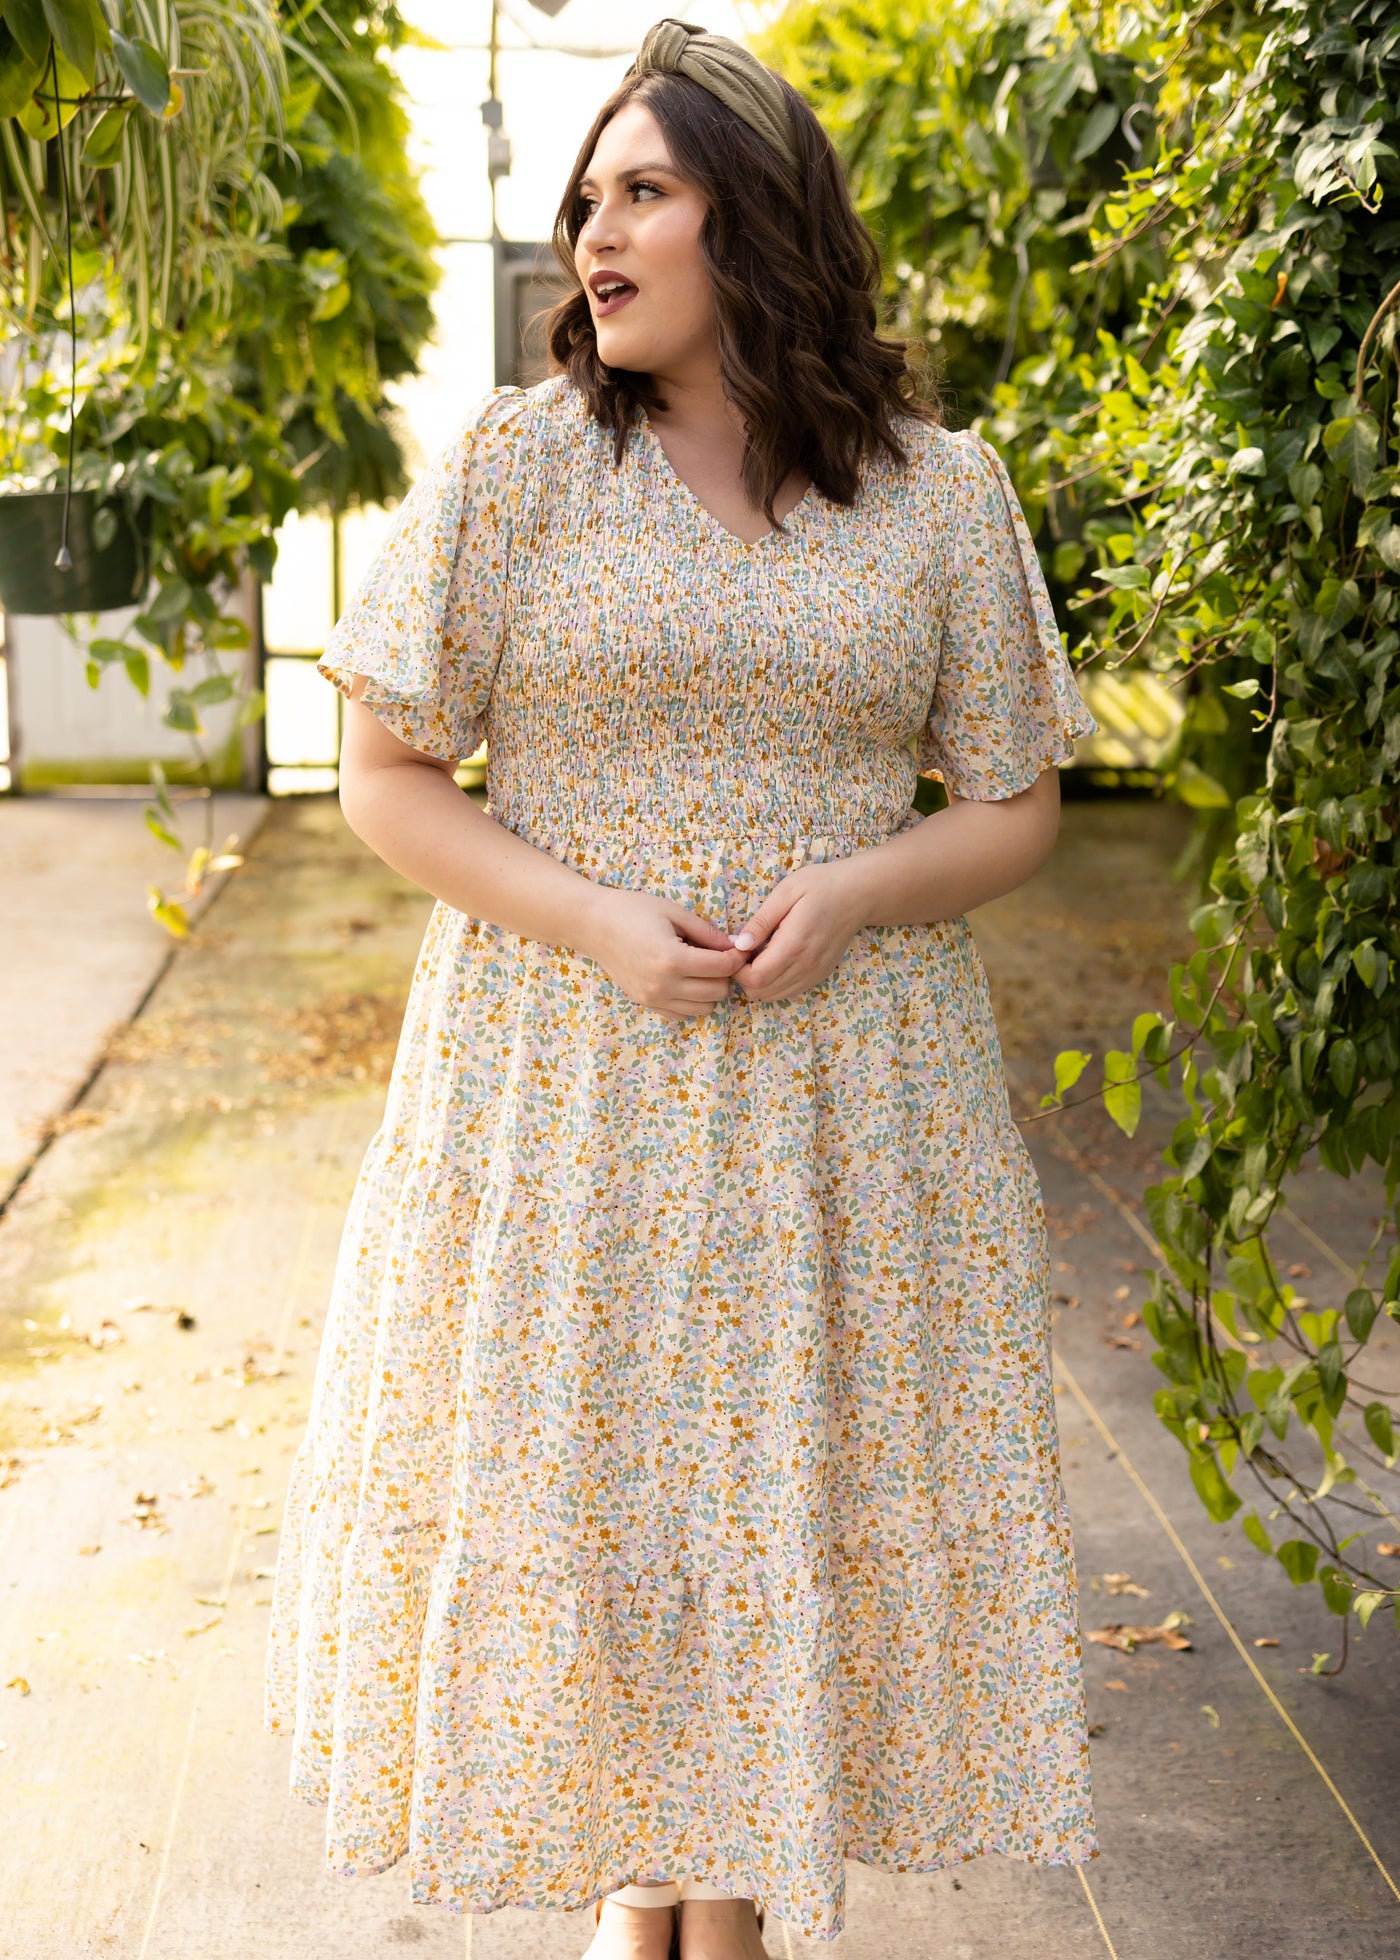 Short sleeve plus size floral dress with v-neck and smocked bodice